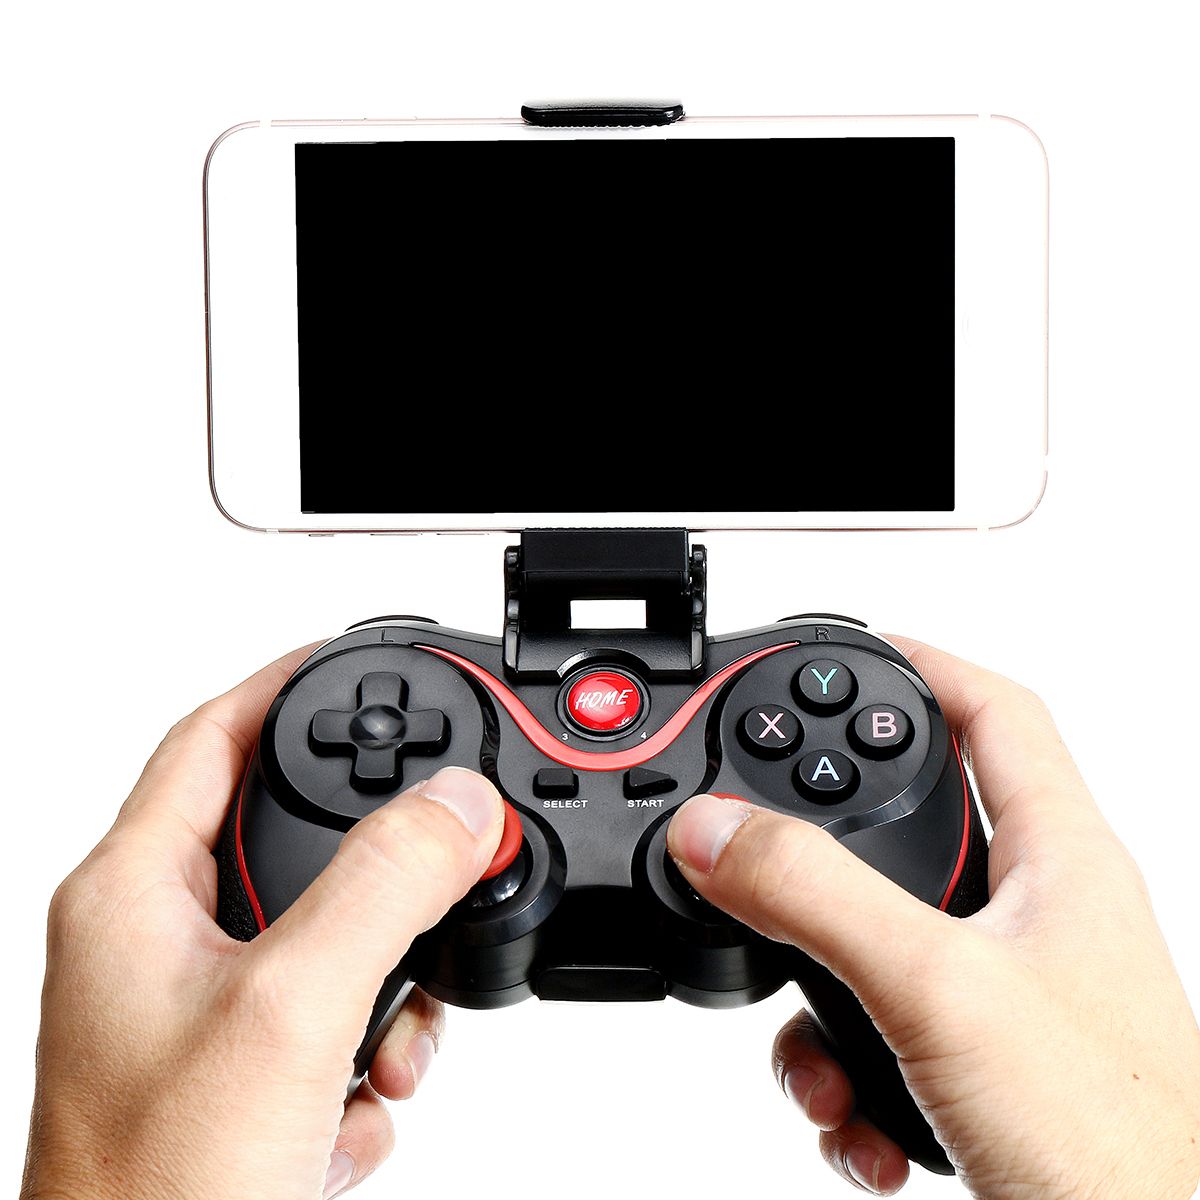 T3-bluetooth-Wireless-Gamepad-Gaming-Controller-for-iOS-Android-Mobile-Phone-Tablet-PC-VR-Glasses-Ga-1698597